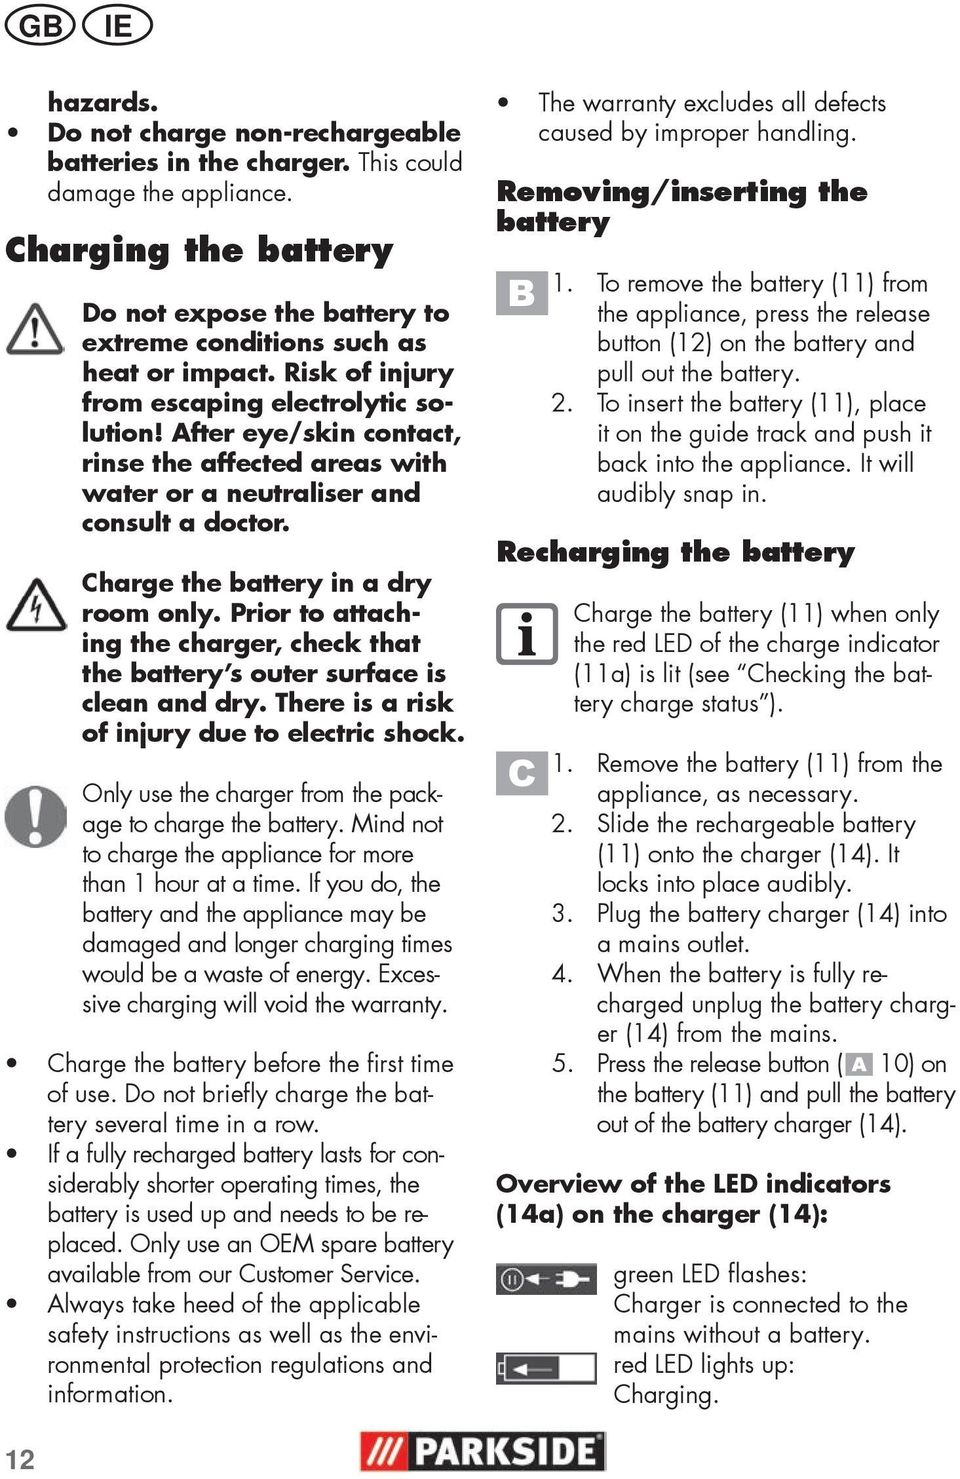 Prior to attaching the charger, check that the battery s outer surface is clean and dry. There is a risk of injury due to electric shock. Only use the charger from the package to charge the battery.